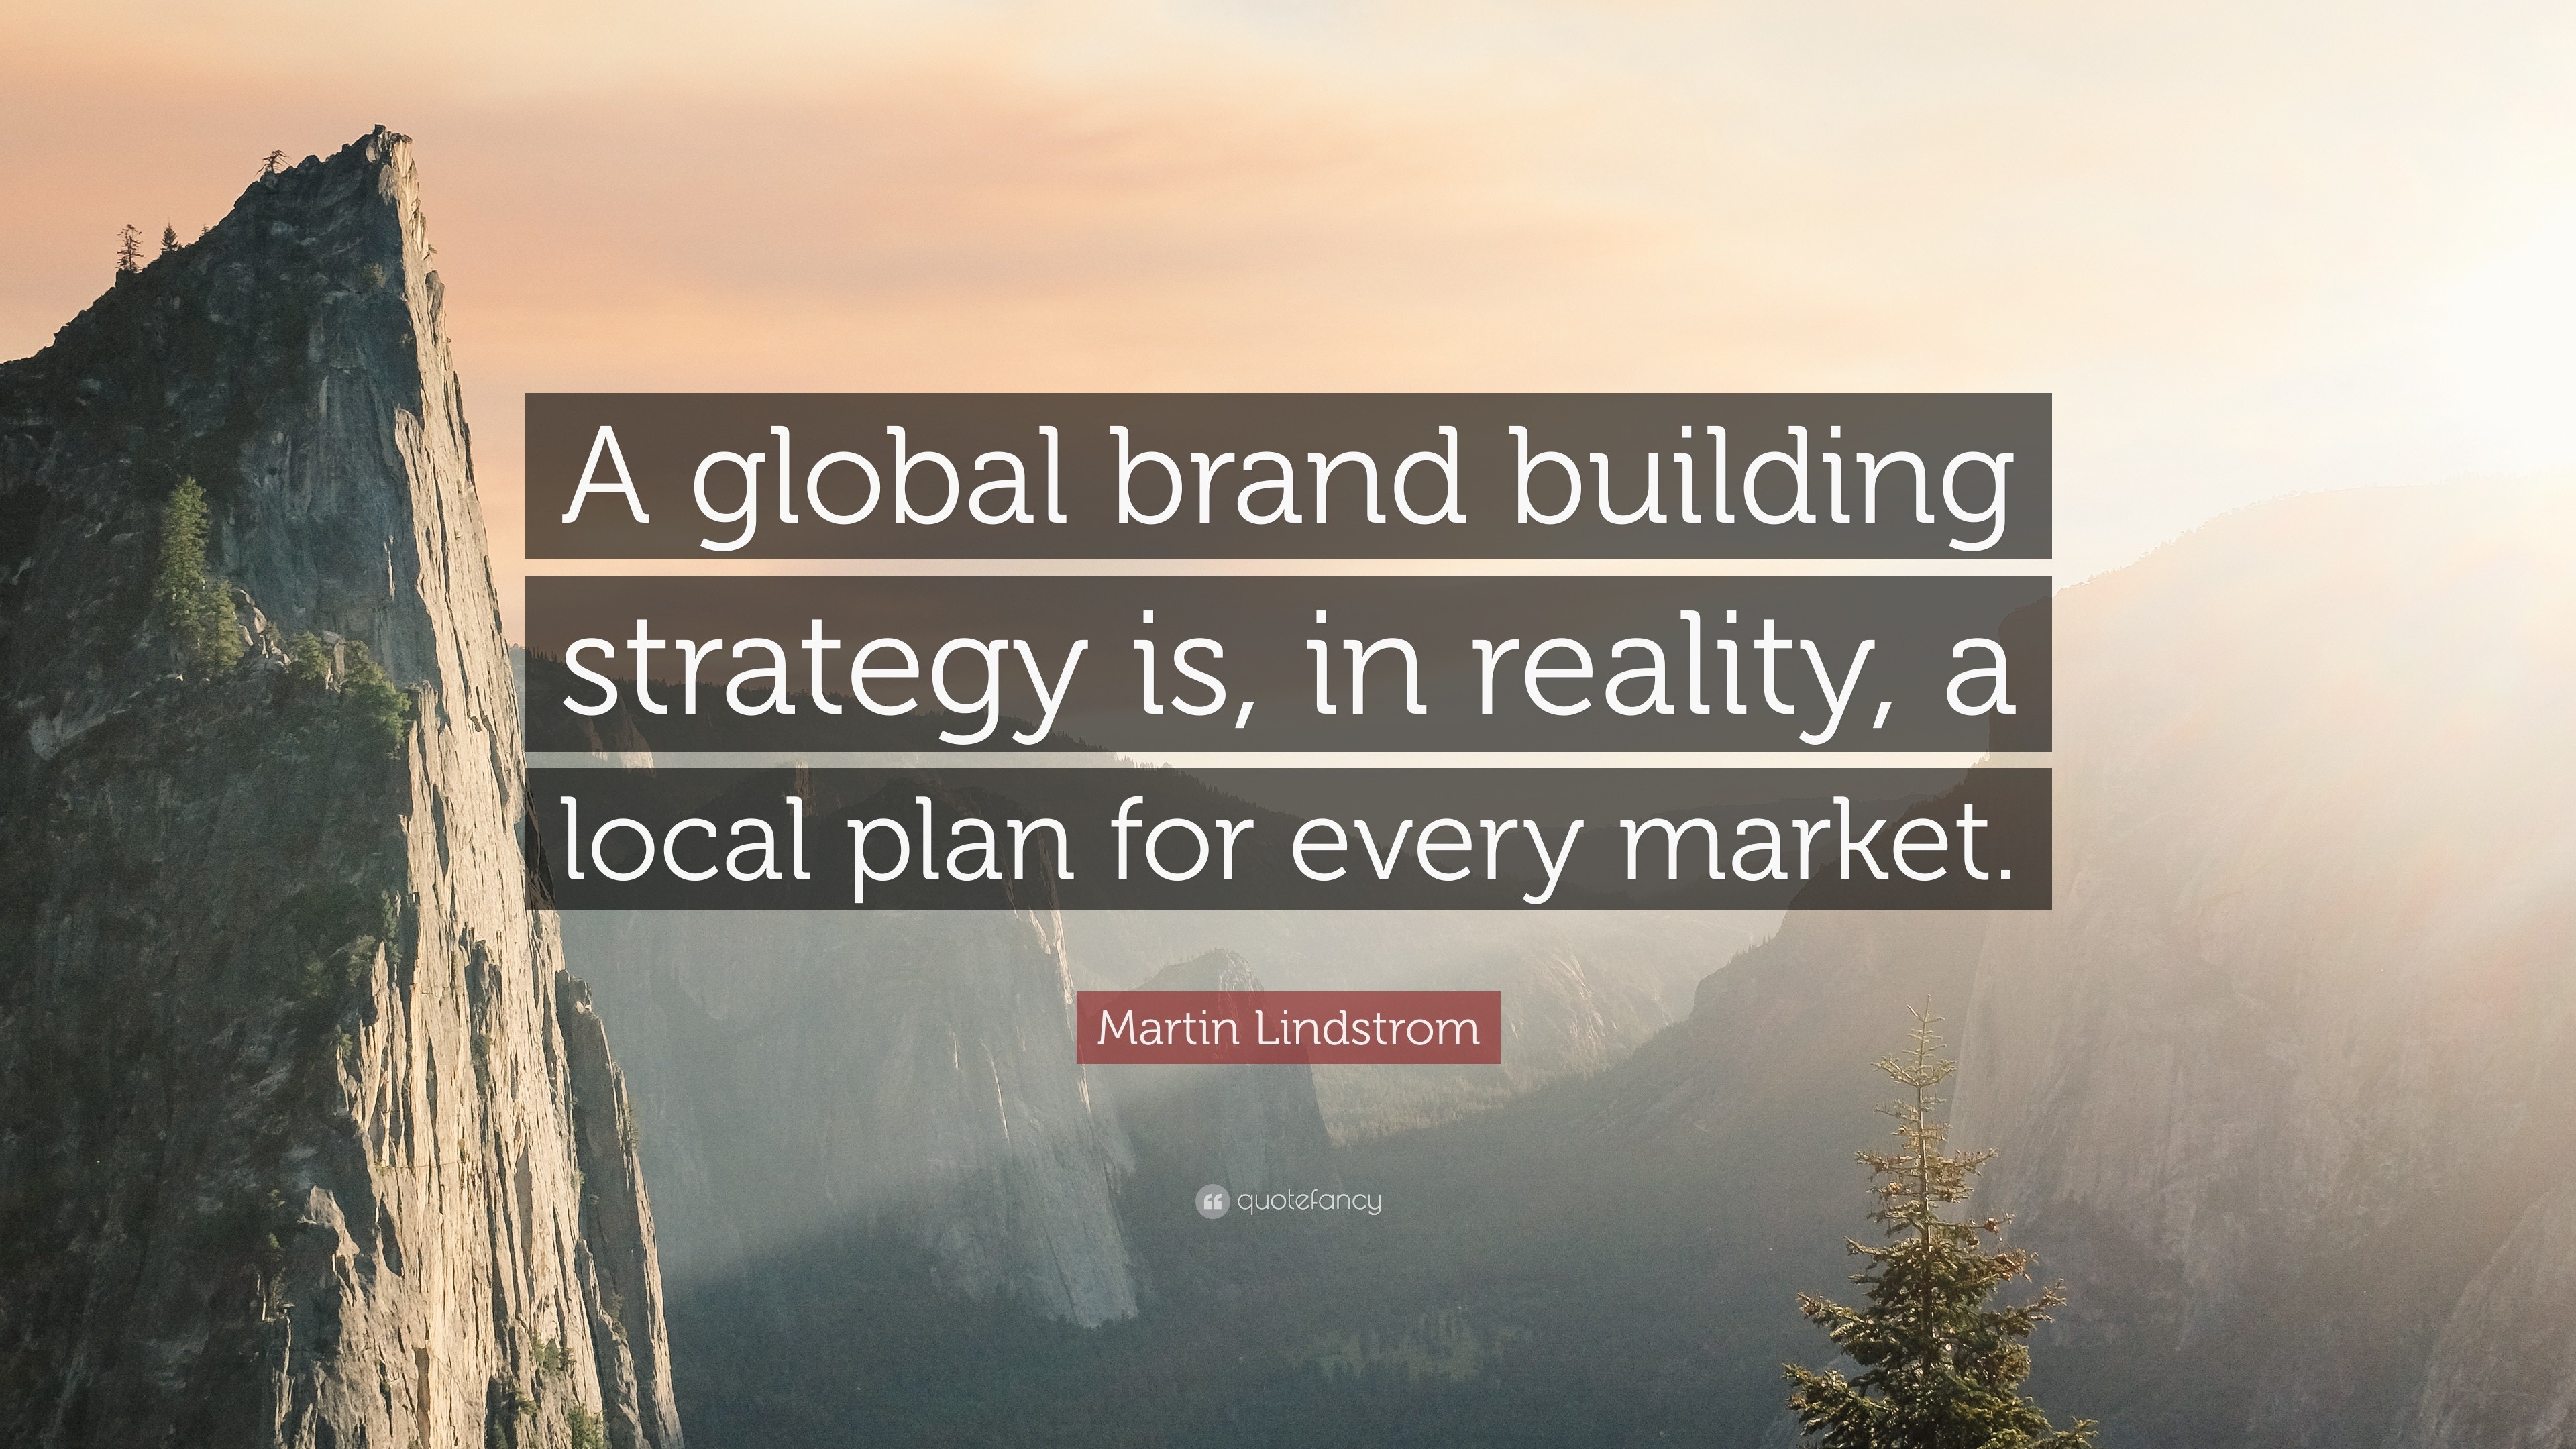 Martin Lindstrom Quote: “A global brand building strategy is, in